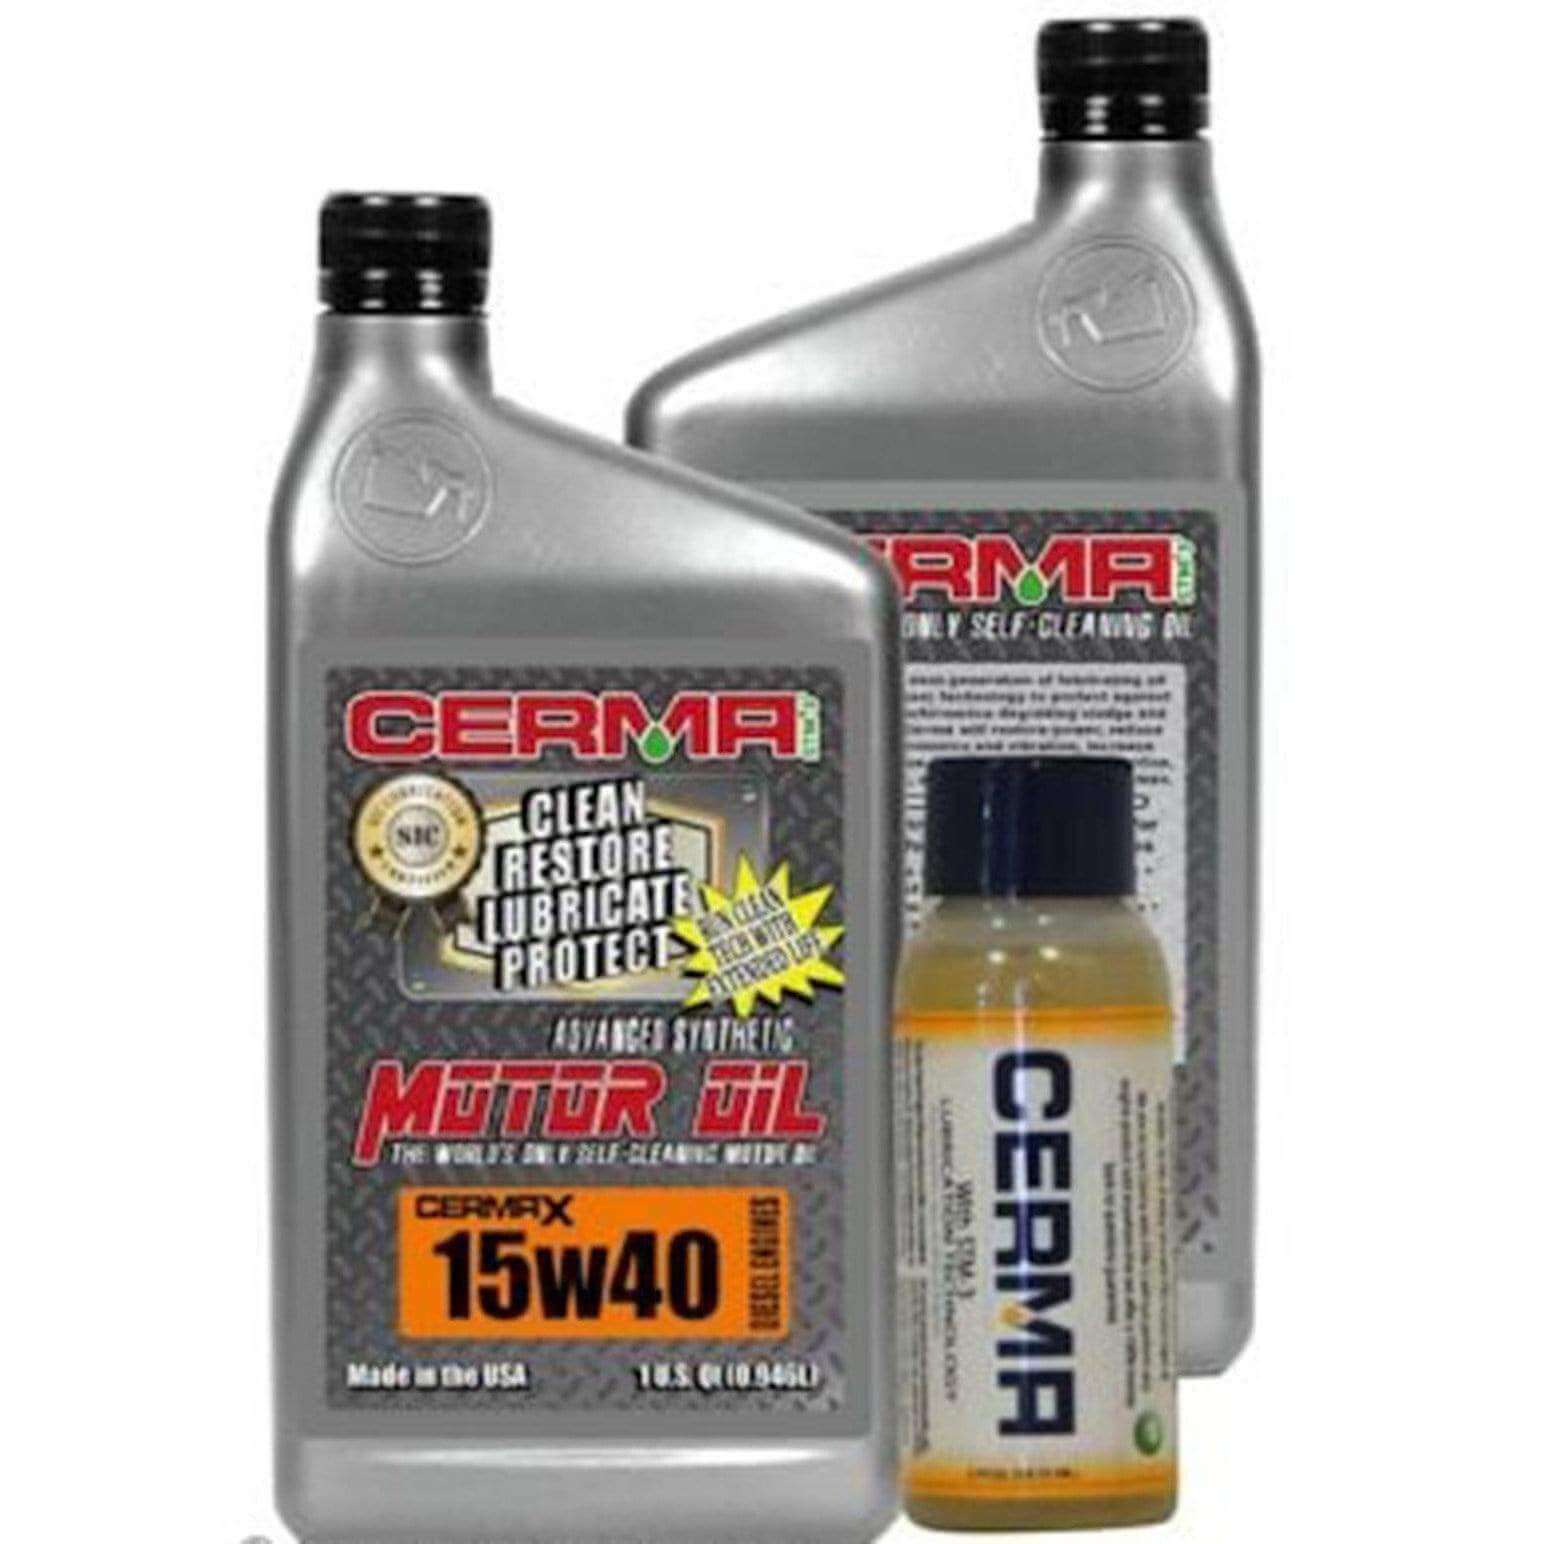 Cermax Diesel Ceramic Synthetic Oil Value Package for 1 To 2.8 Liter Engines at $136.4 only from cermatreatment.com